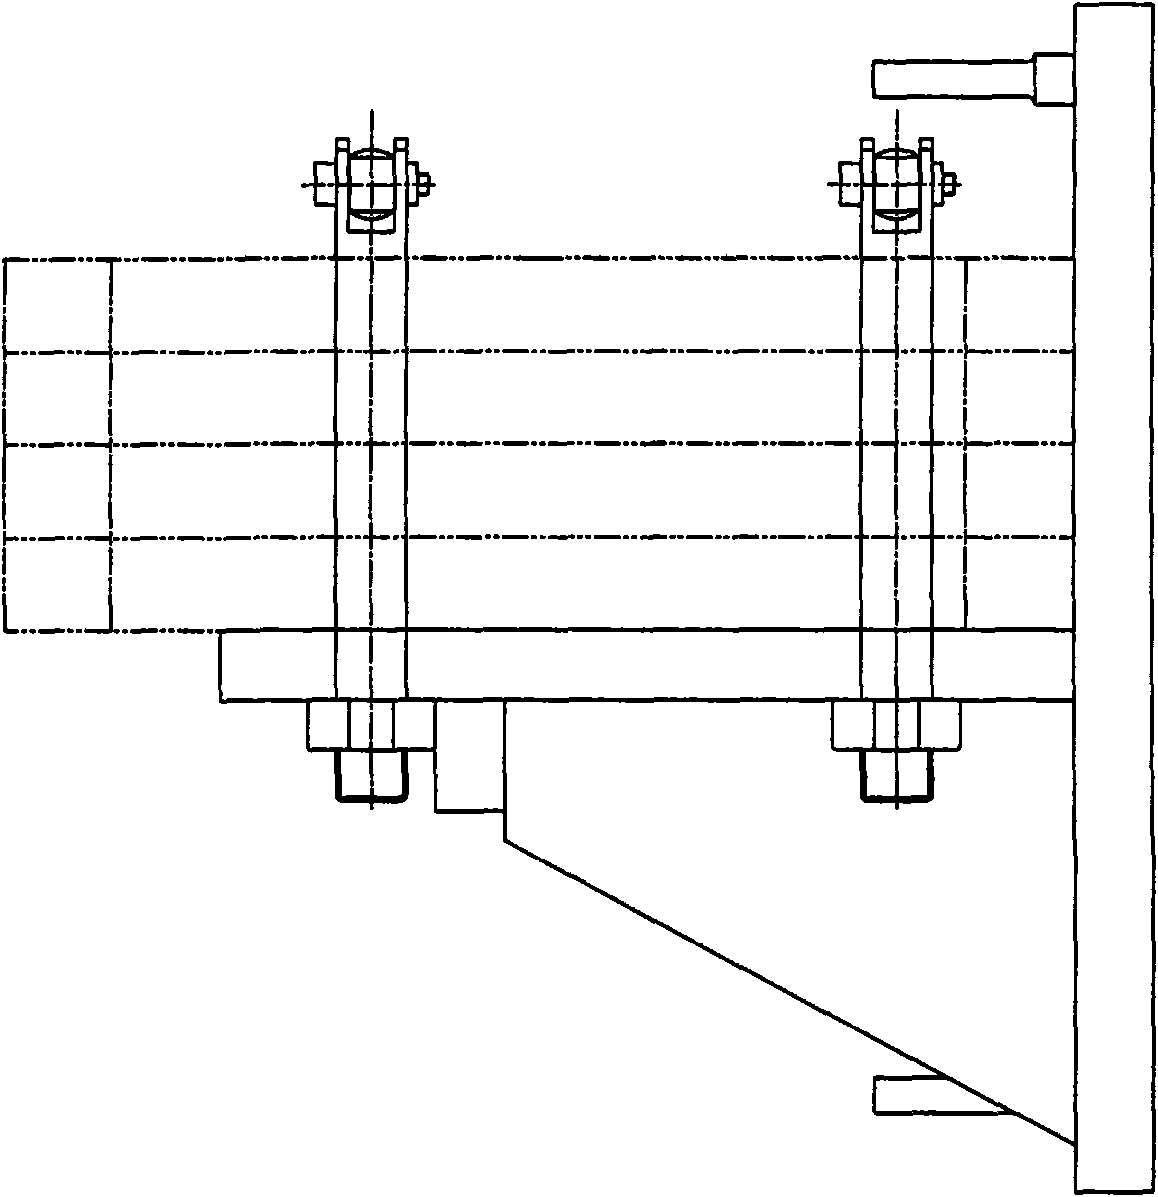 Operating method for grinding periphery of thin-wall part